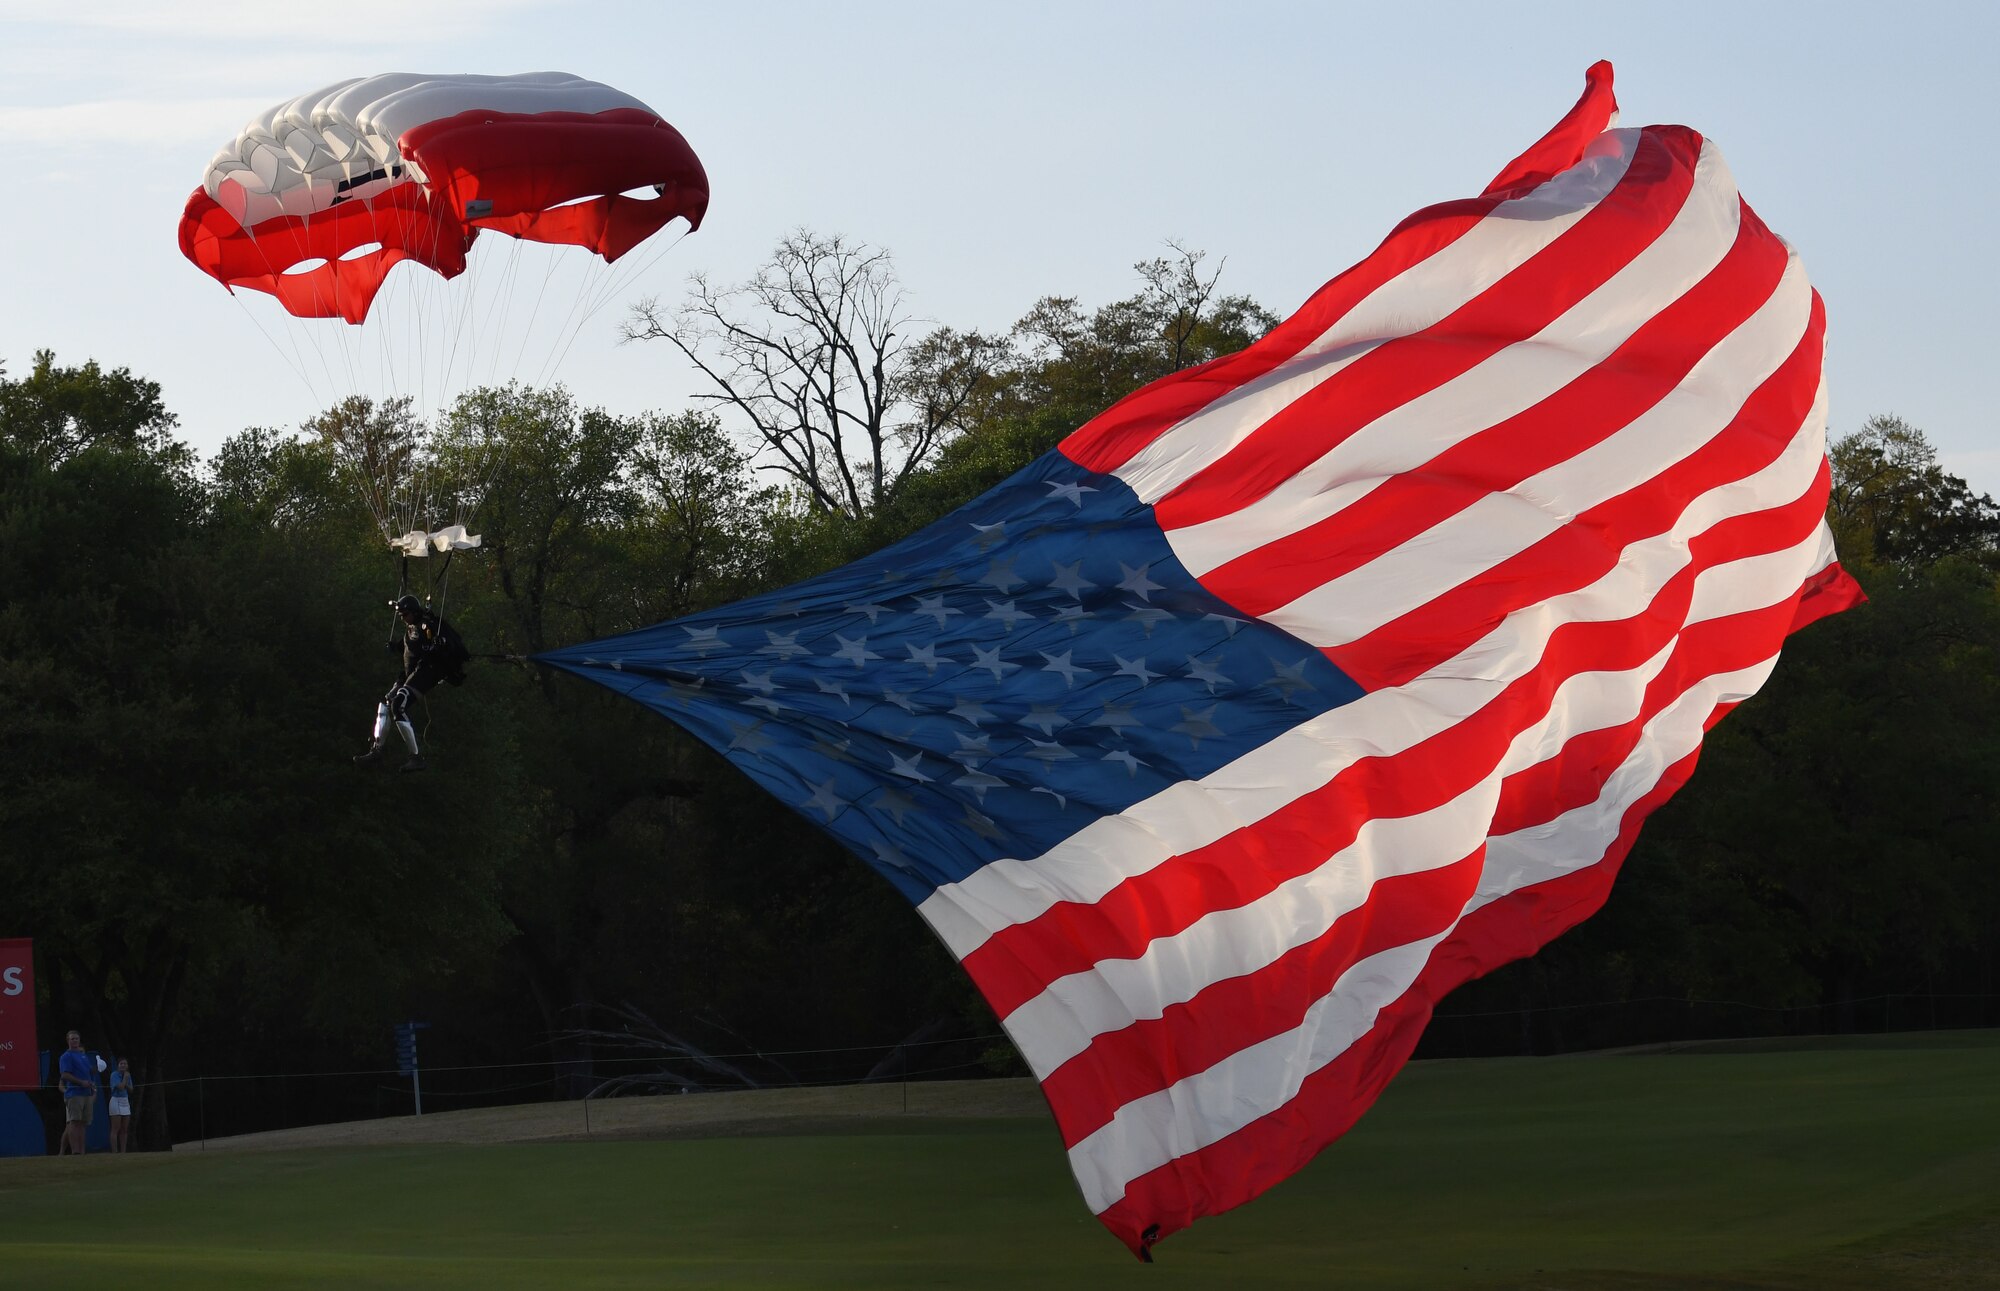 Retired U.S. Army Sgt. 1st Class Dana Bowman, a double amputee, parachutes while carrying the U.S. Flag during the Rapiscan Systems Classic Champions Tour at Fallen Oak Golf Club March 25, 2018, in Saucier, Mississippi. Keesler personnel performed the national anthem and presented the colors during the closing ceremony of the three-day event. This is the fifth year that the event has been held on the coast. (U.S. Air Force photo by Kemberly Groue)